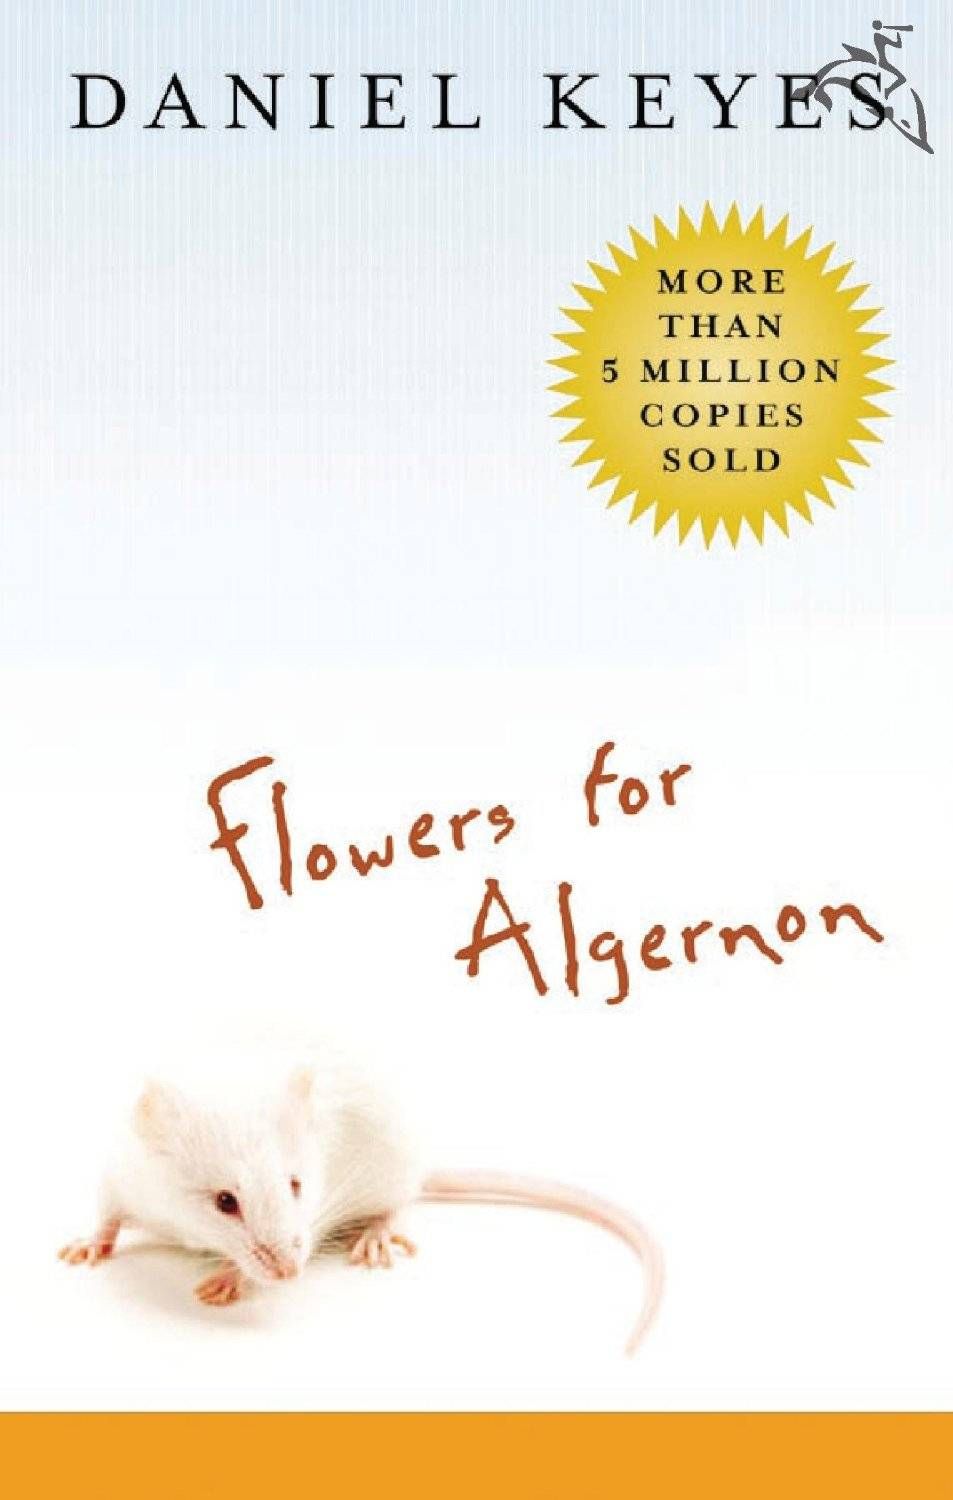 flowers on the cover of Algernon's book